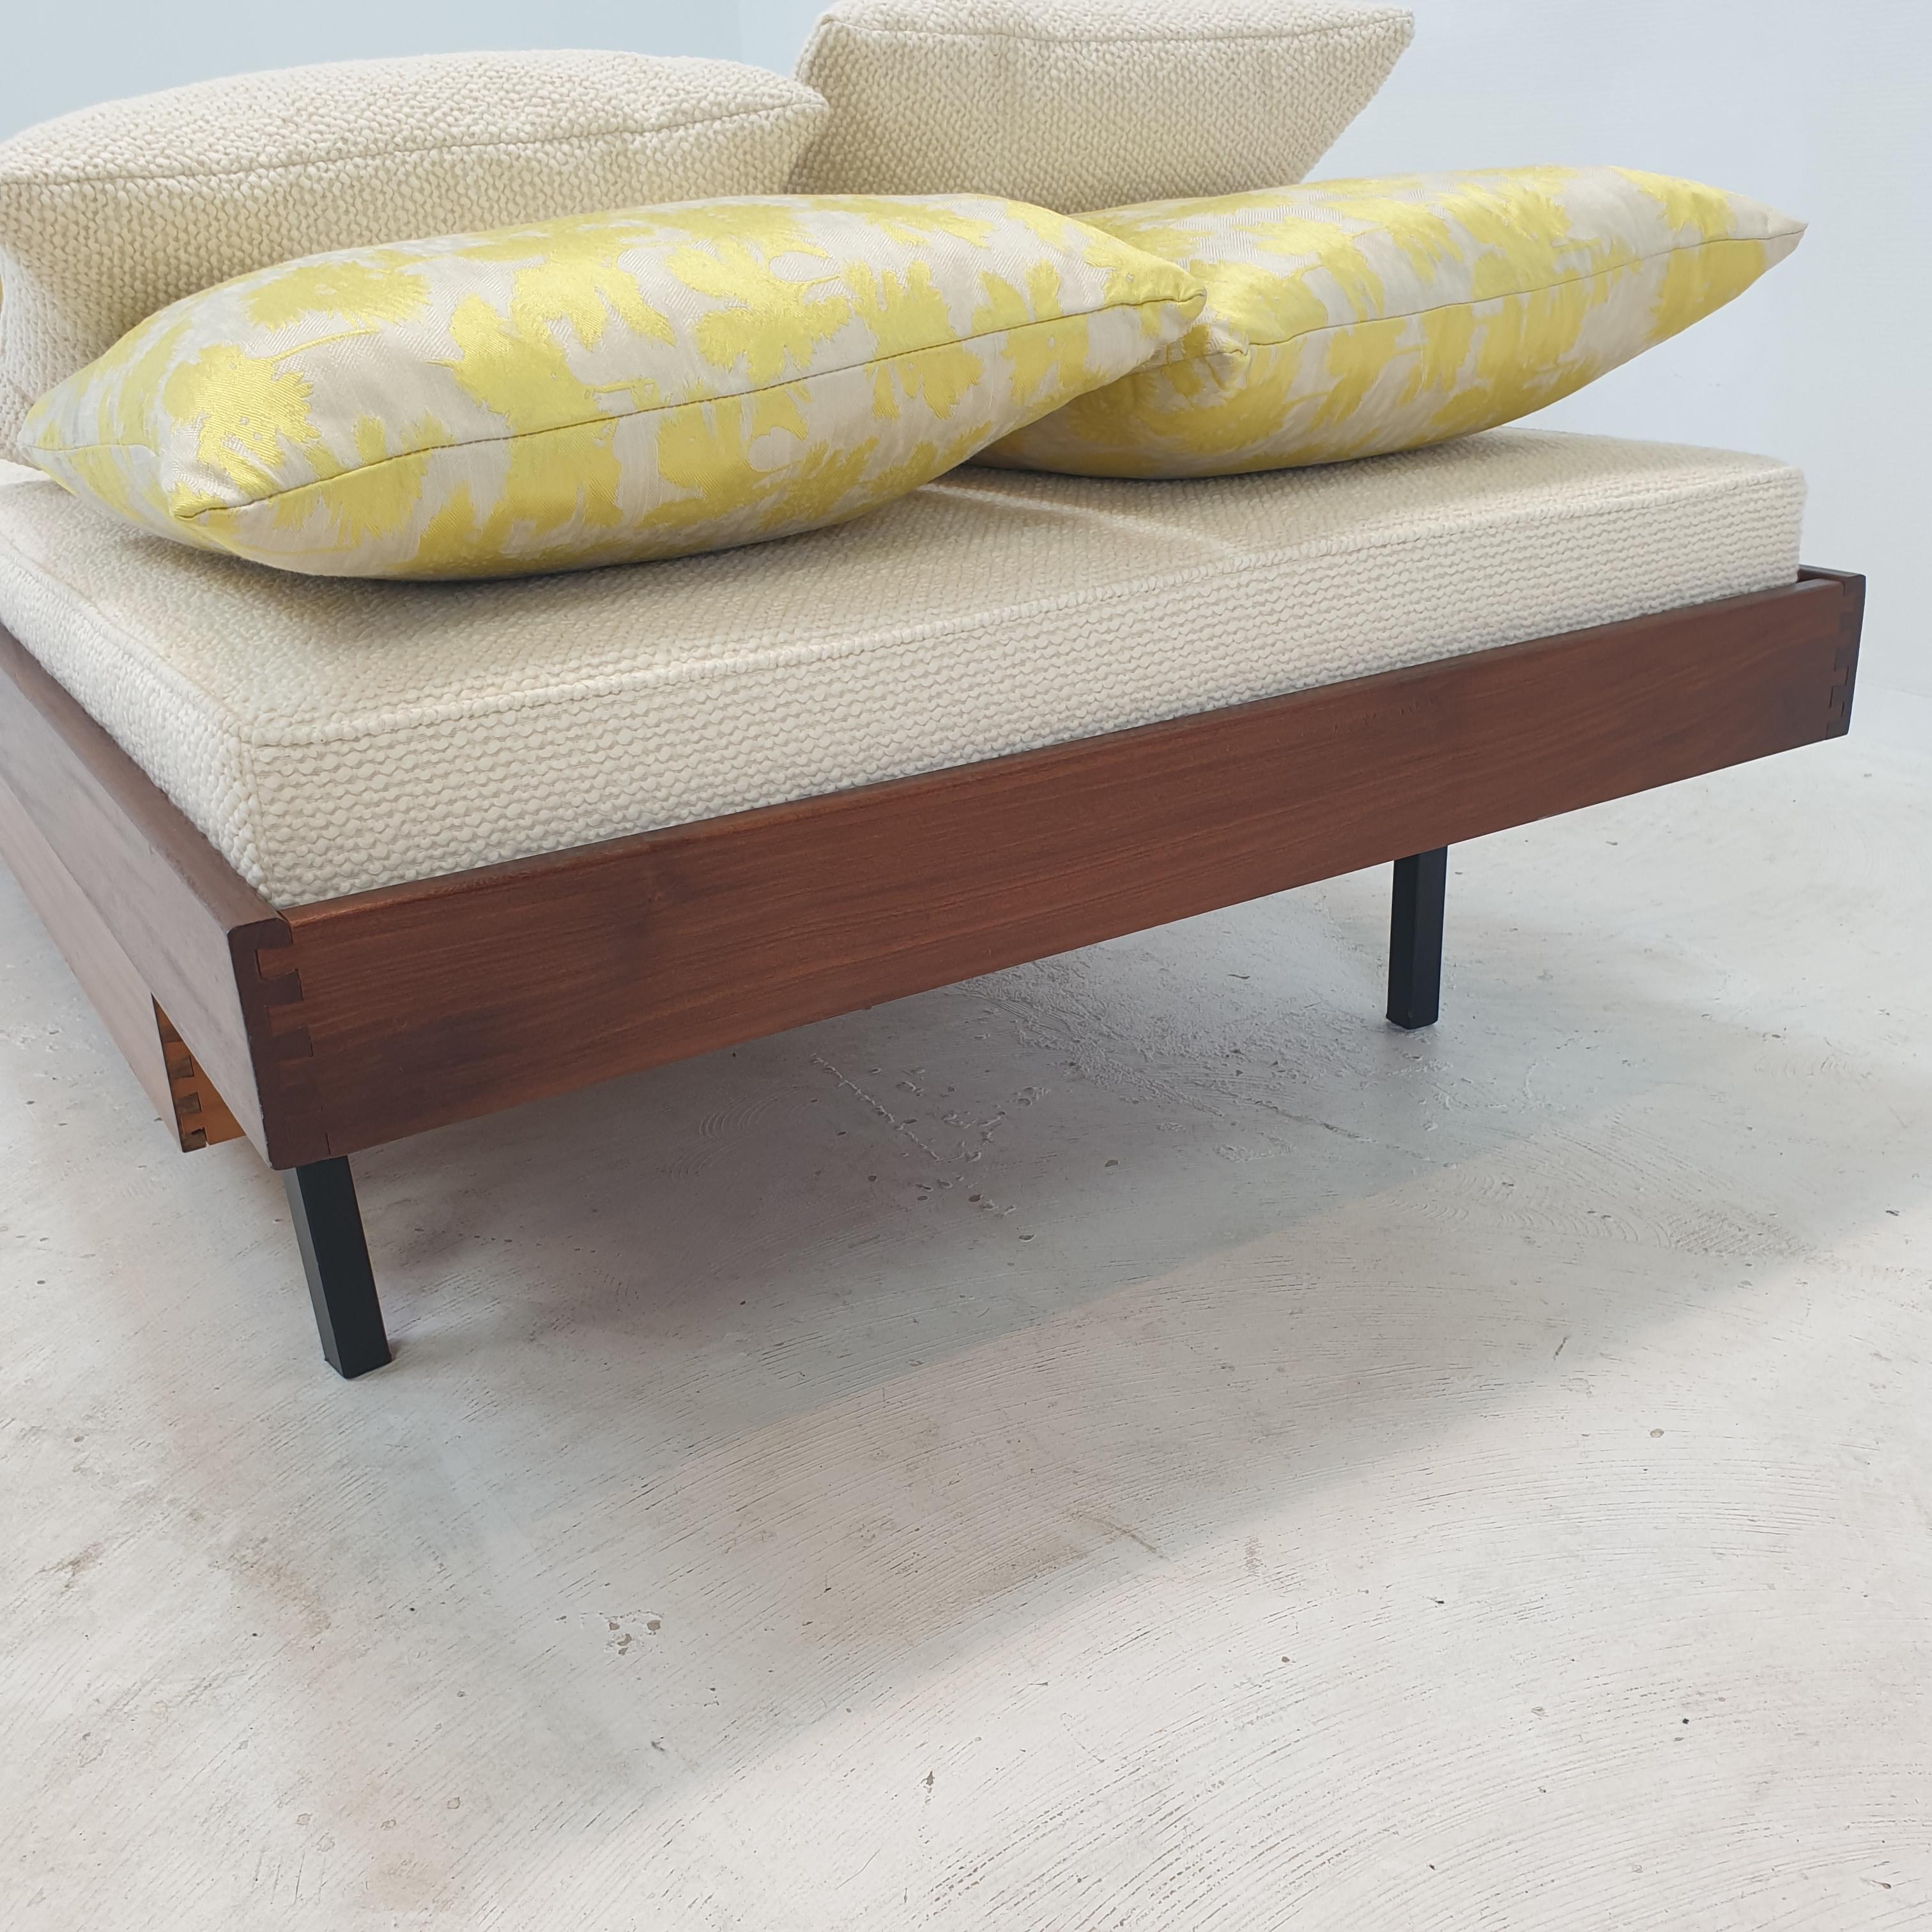 Teak Daybed with Dedar Cushions and Bolster, 1960s For Sale 9